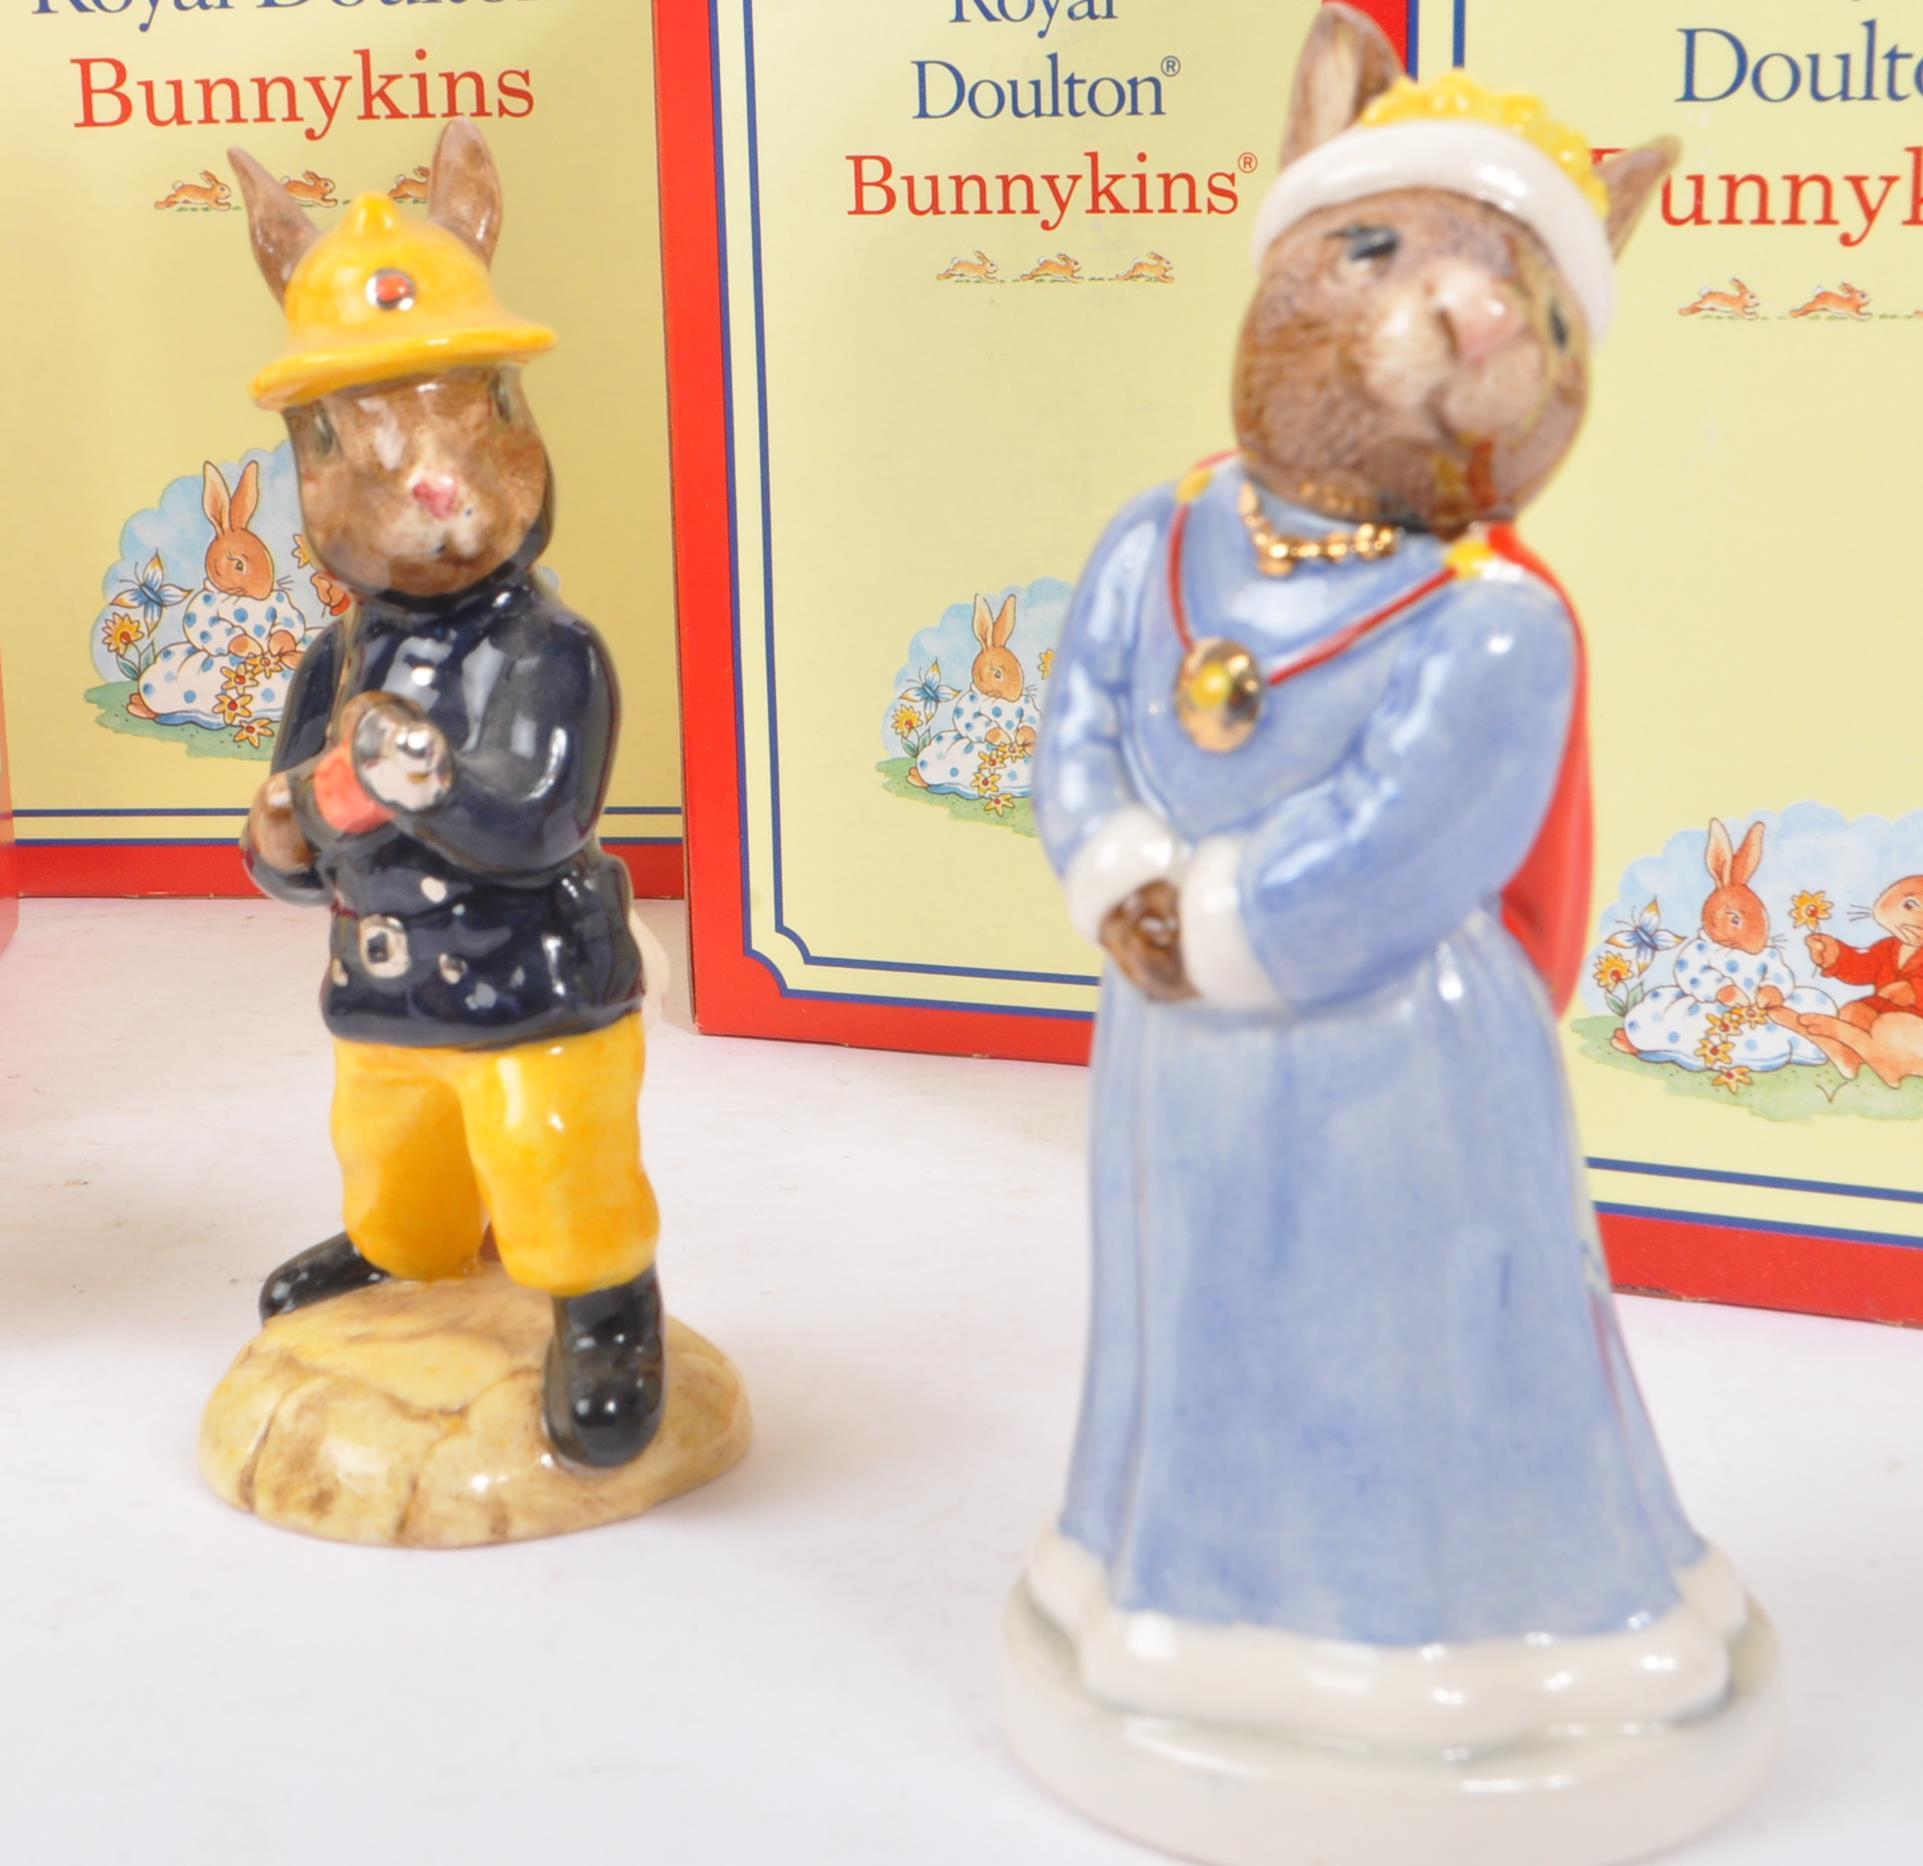 ROYAL DOULTON - BUNNYKINS - COLLECTION OF PORCELAIN FIGURE - Image 4 of 8